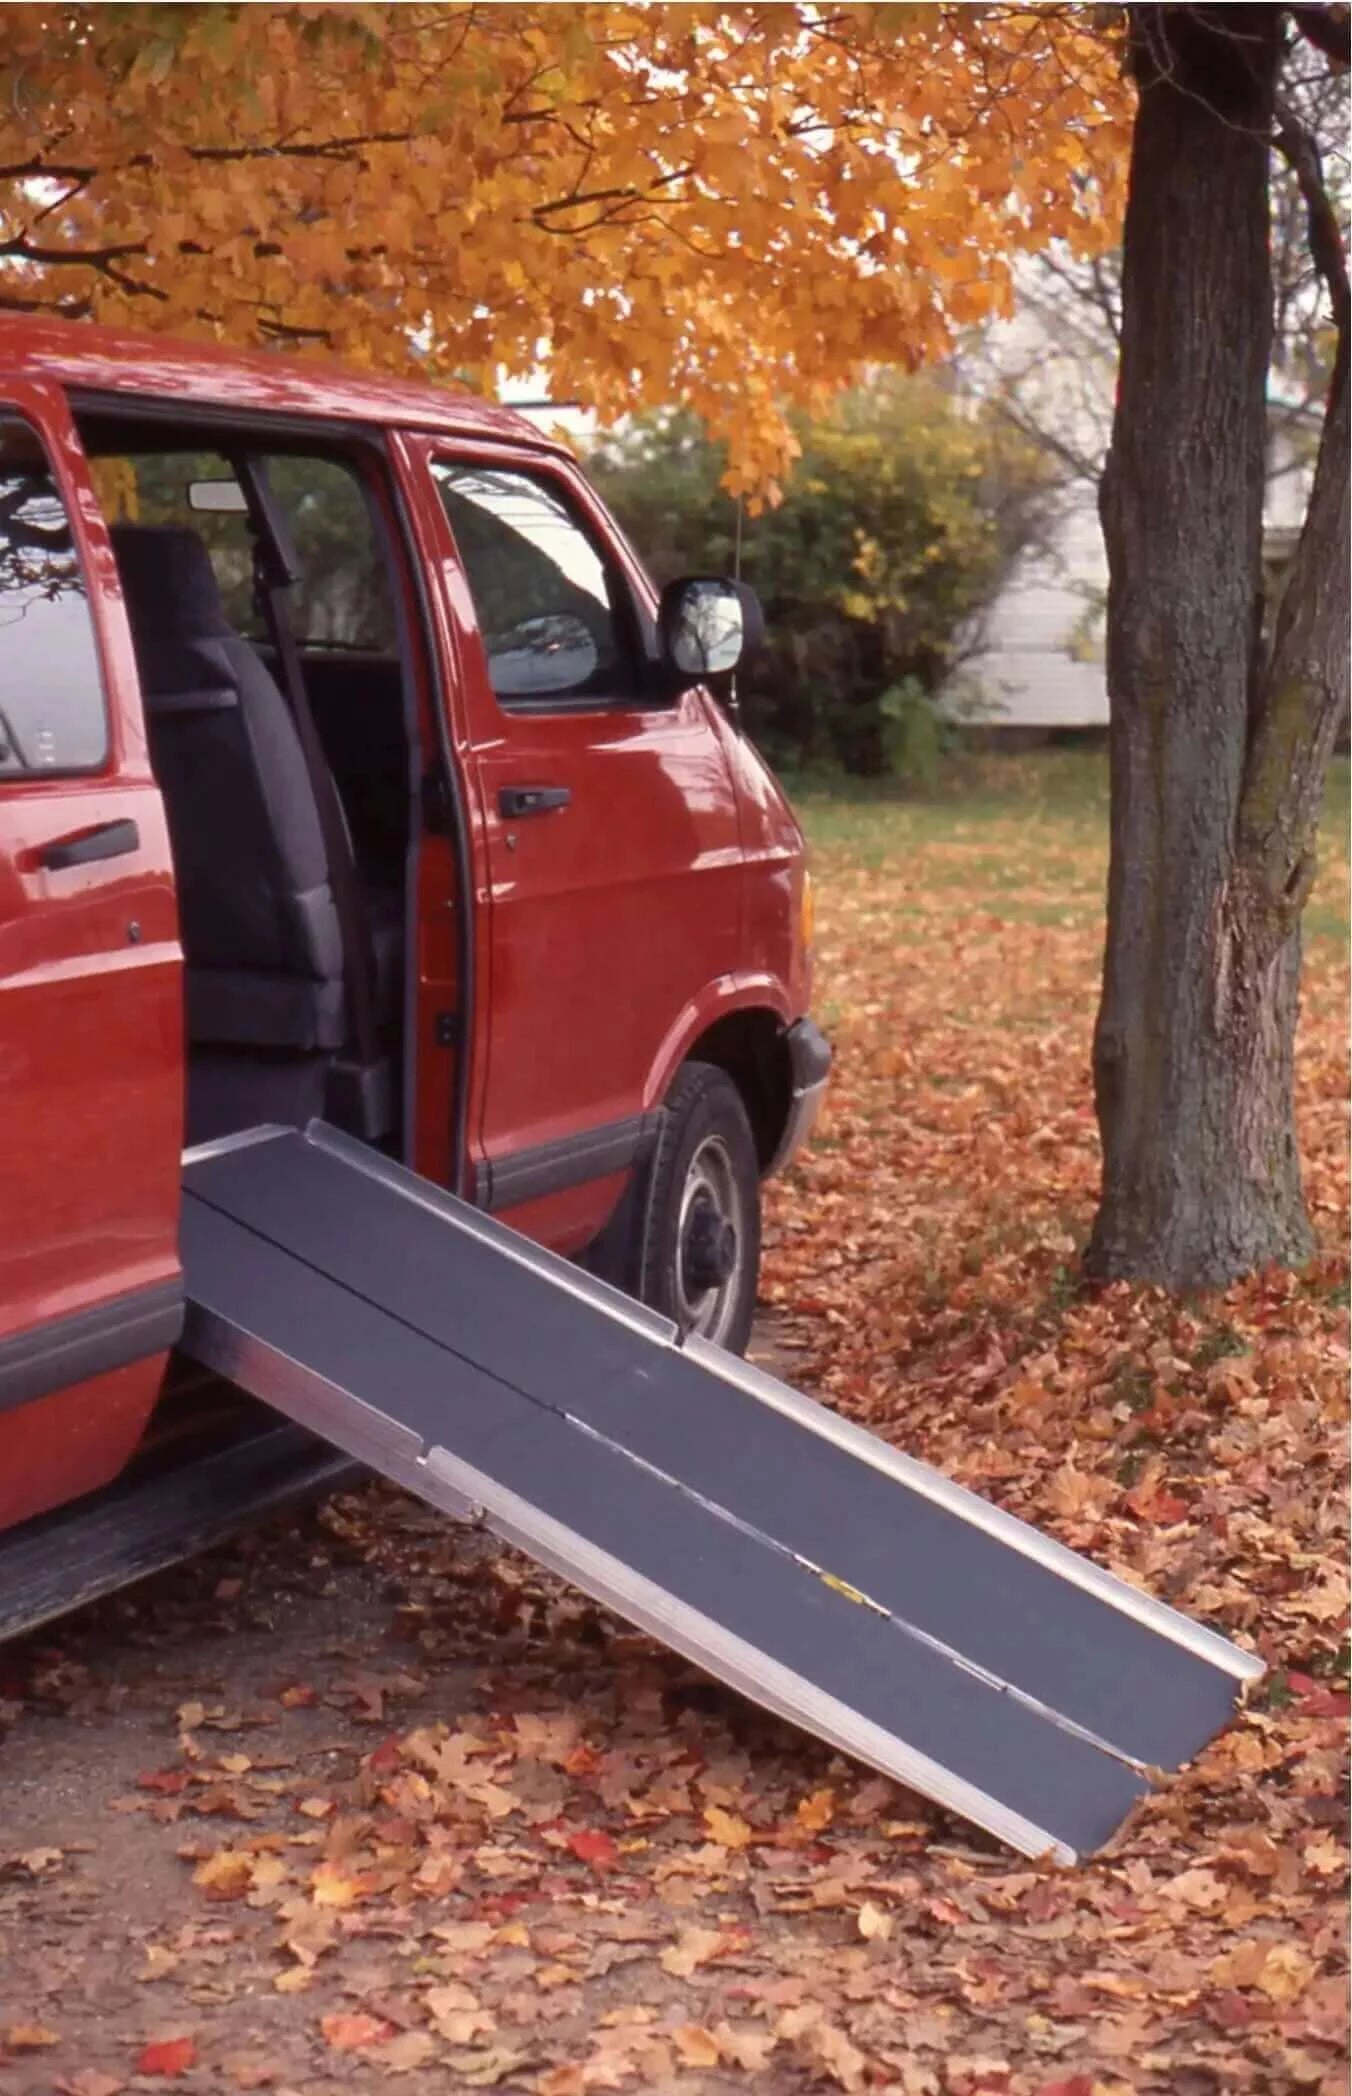 alumilite ready folding ramp being used with a red van